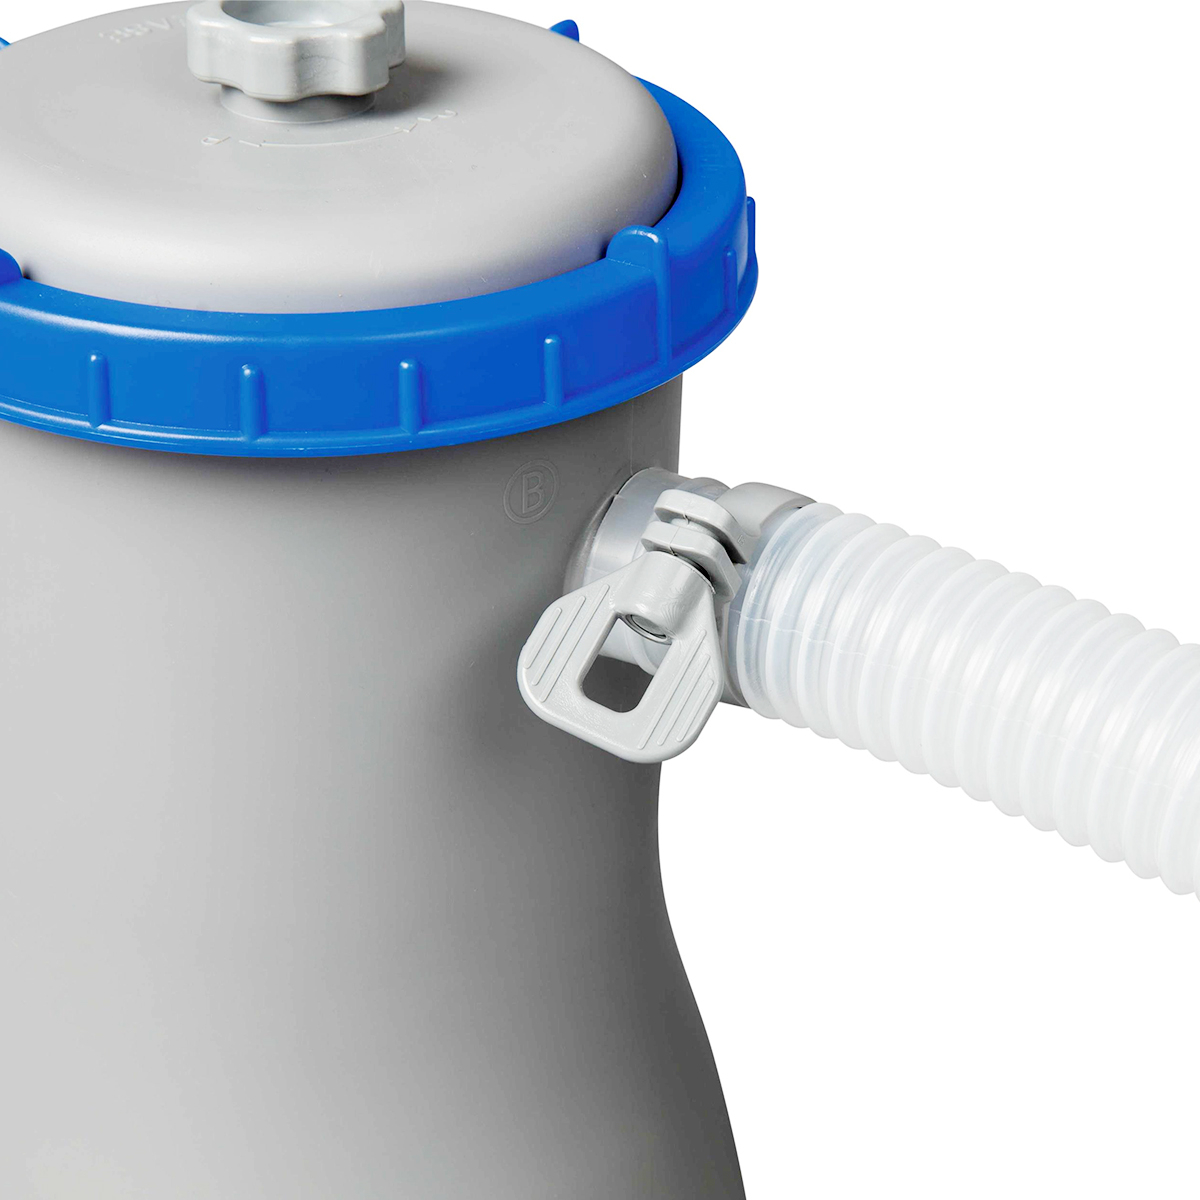 Bestway Pool Filter Pump - Three Sizes Available